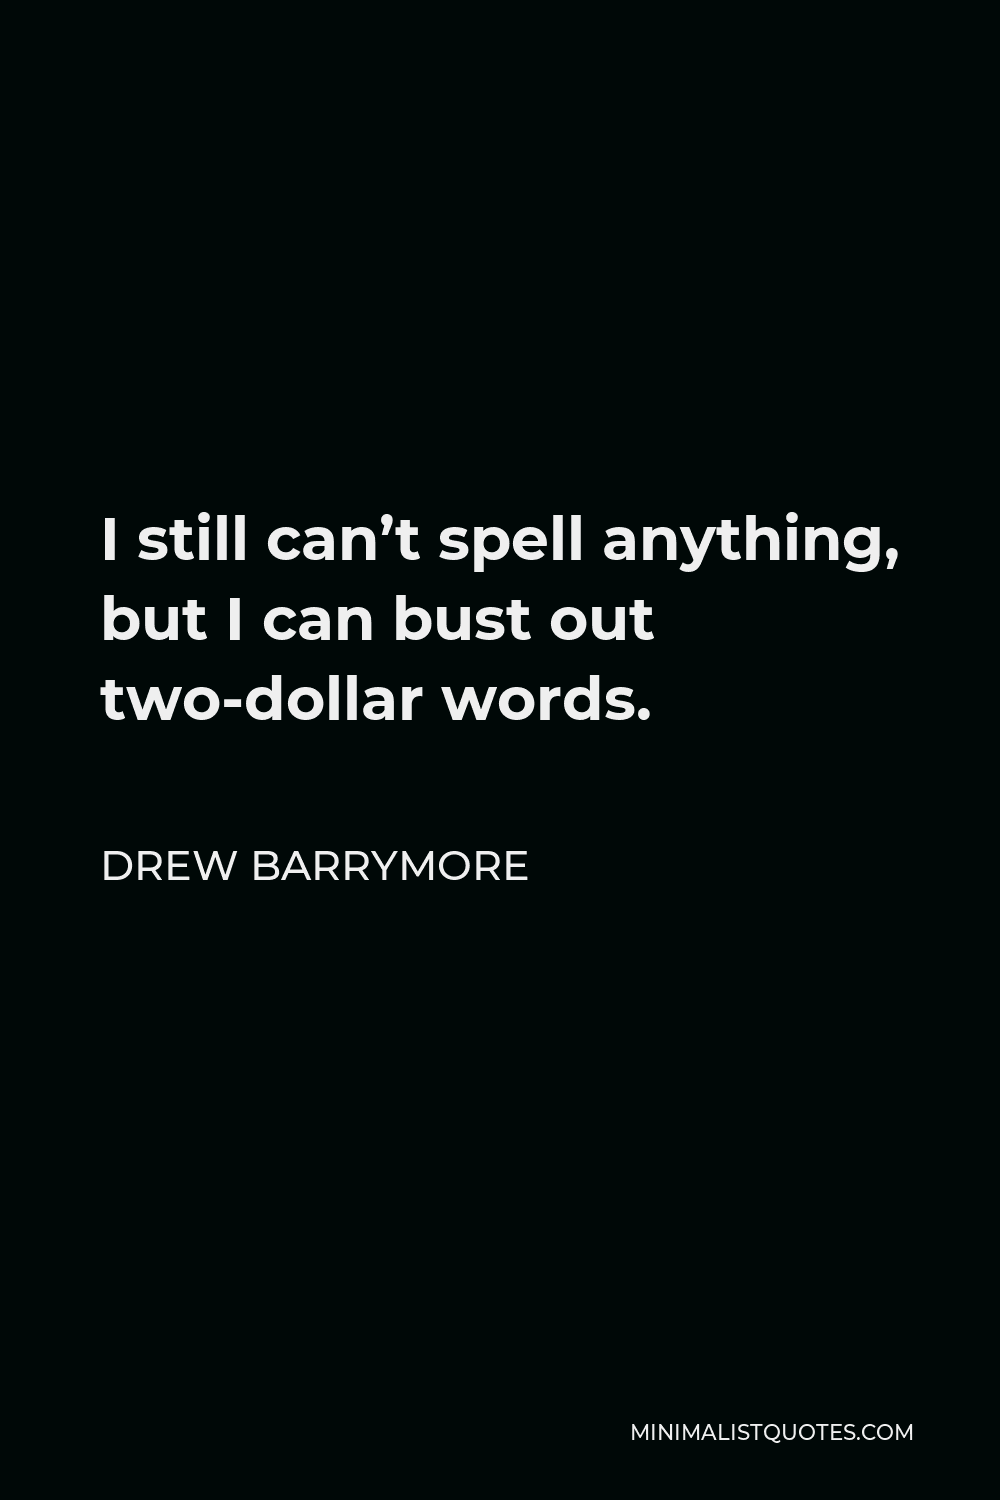 Drew Barrymore Quote - I still can’t spell anything, but I can bust out two-dollar words.